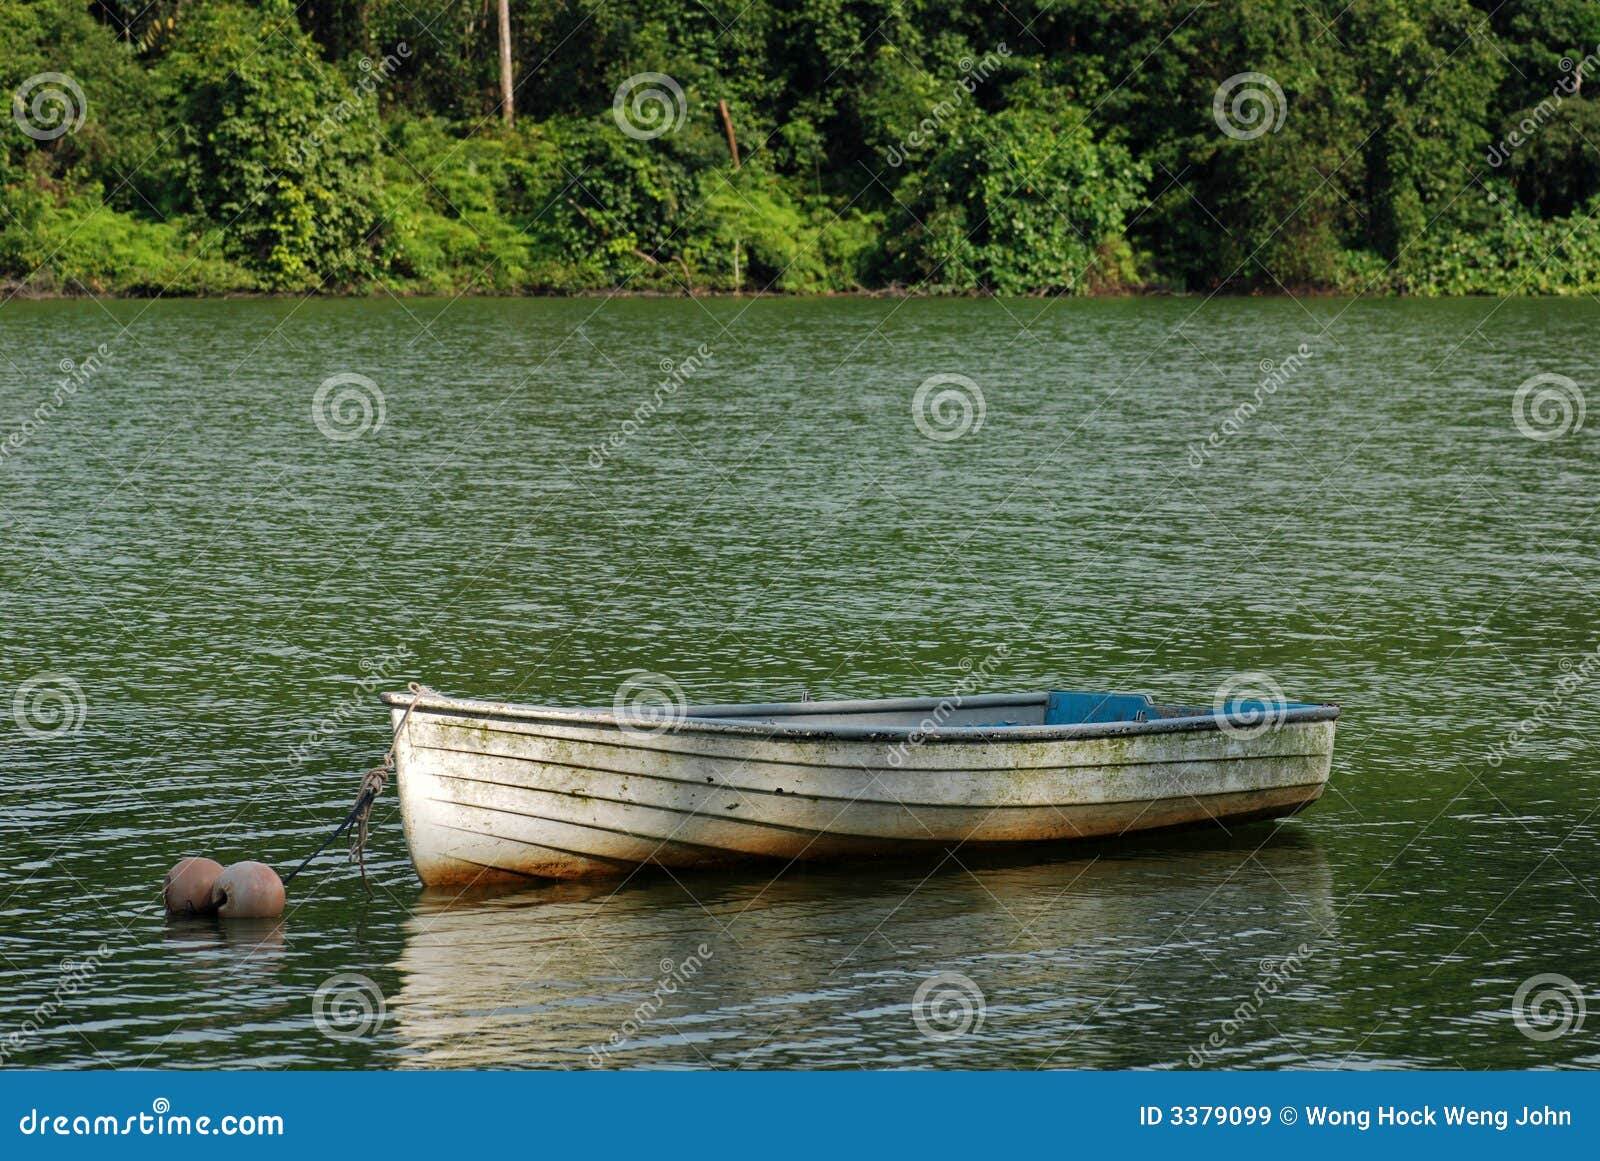 Small Wooden Boat In The Lake Royalty Free Stock Images ...